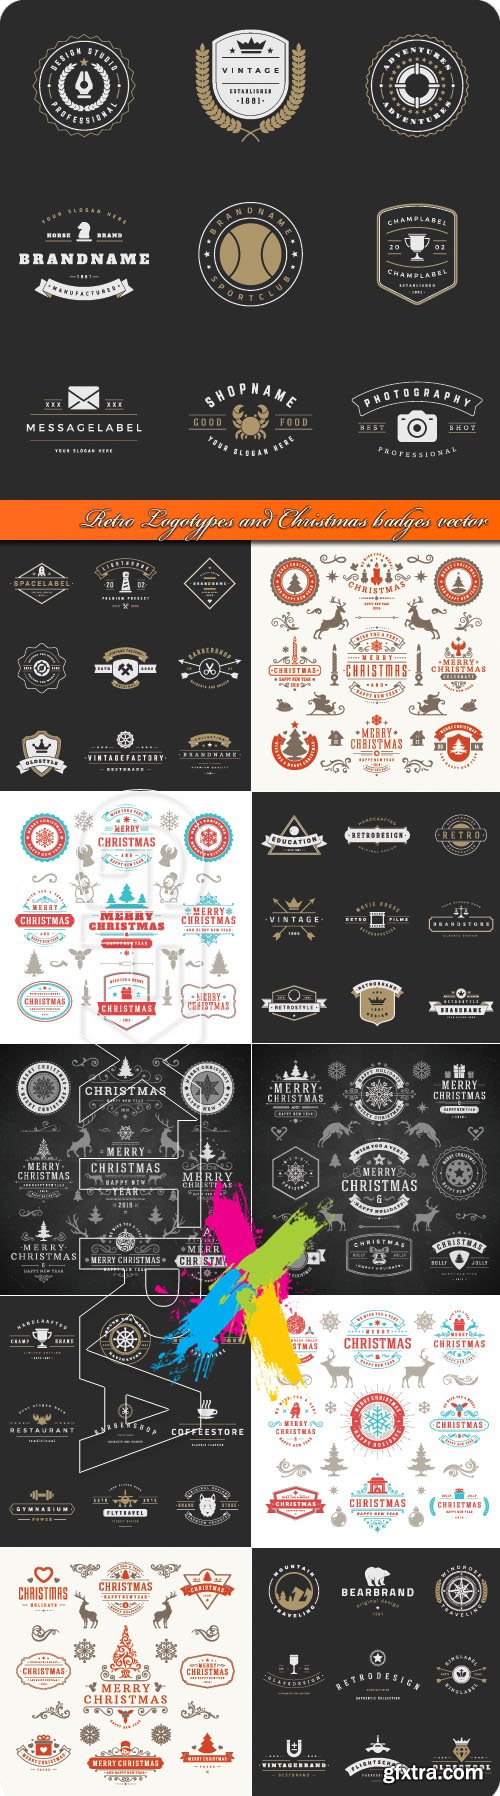 Retro Logotypes and Christmas badges vector